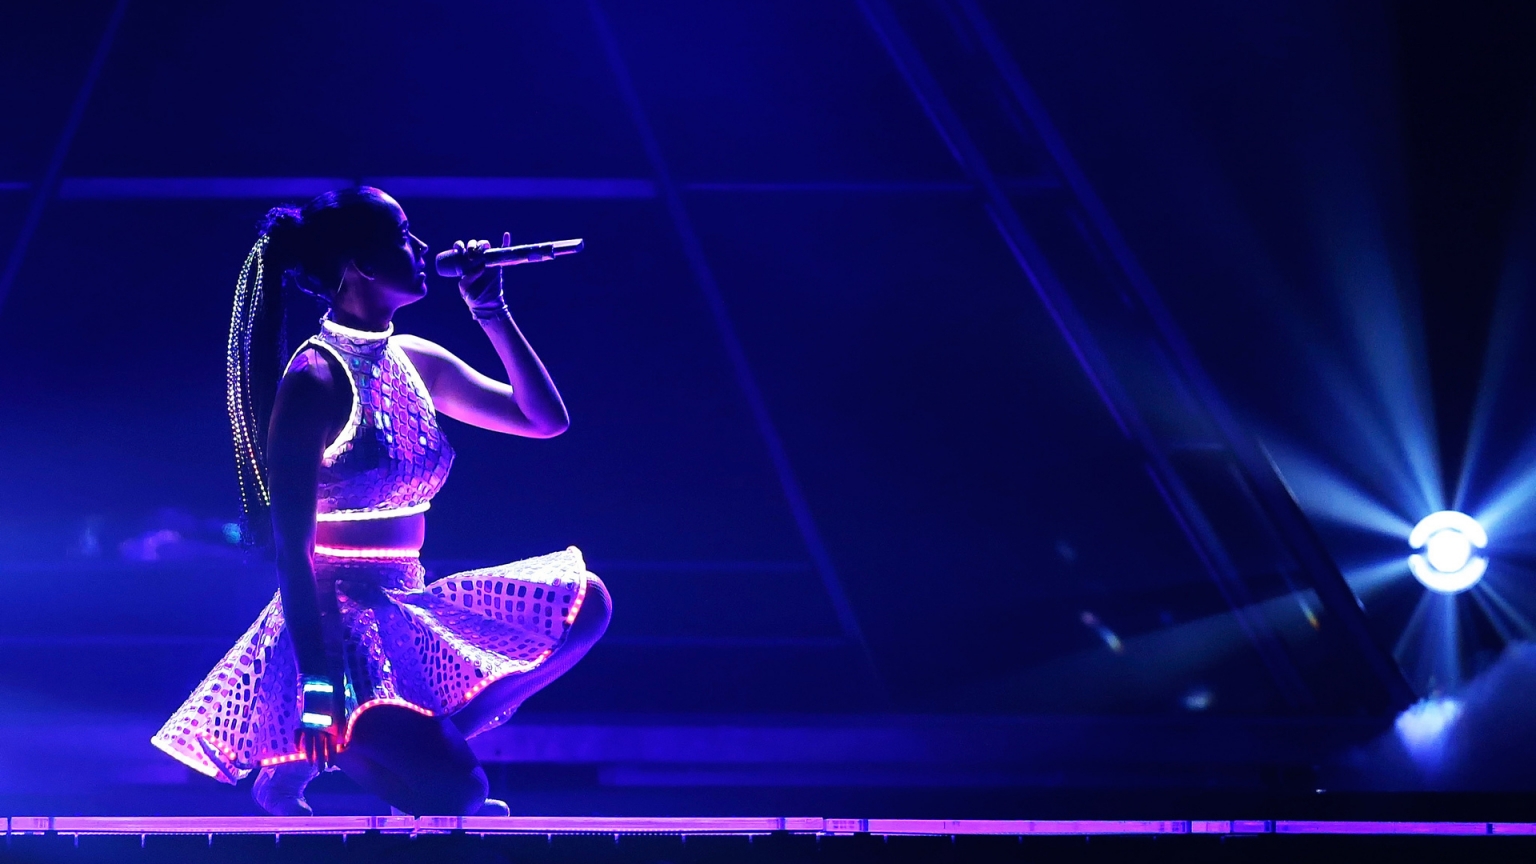 Katy Perry Live Concert for 1536 x 864 HDTV resolution